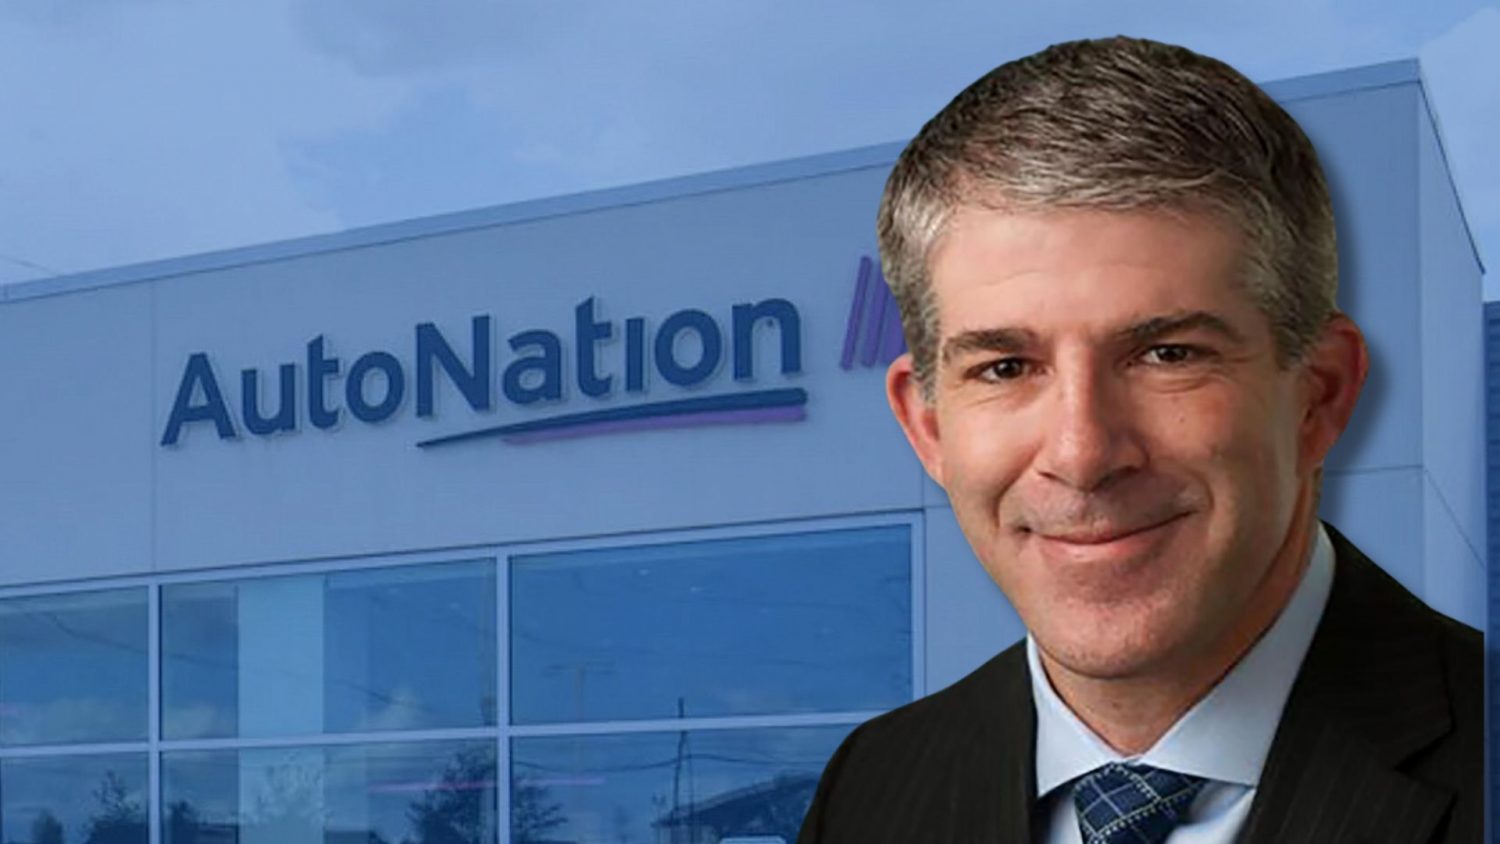 AutoNation has hired former Nissan and Gulf State Toyota executive Jeff Parent to replace outgoing chief operations officer Steve Kwak.